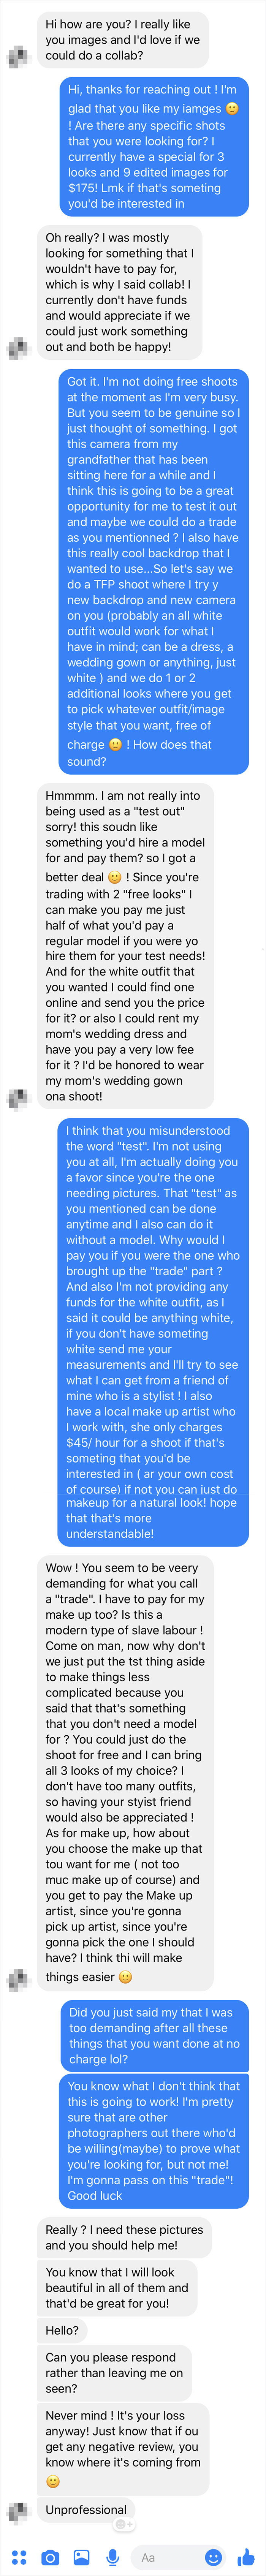 My Friend Is A Photographer And He Told Me That He Usually Gets Tons Of Messages Like This One!